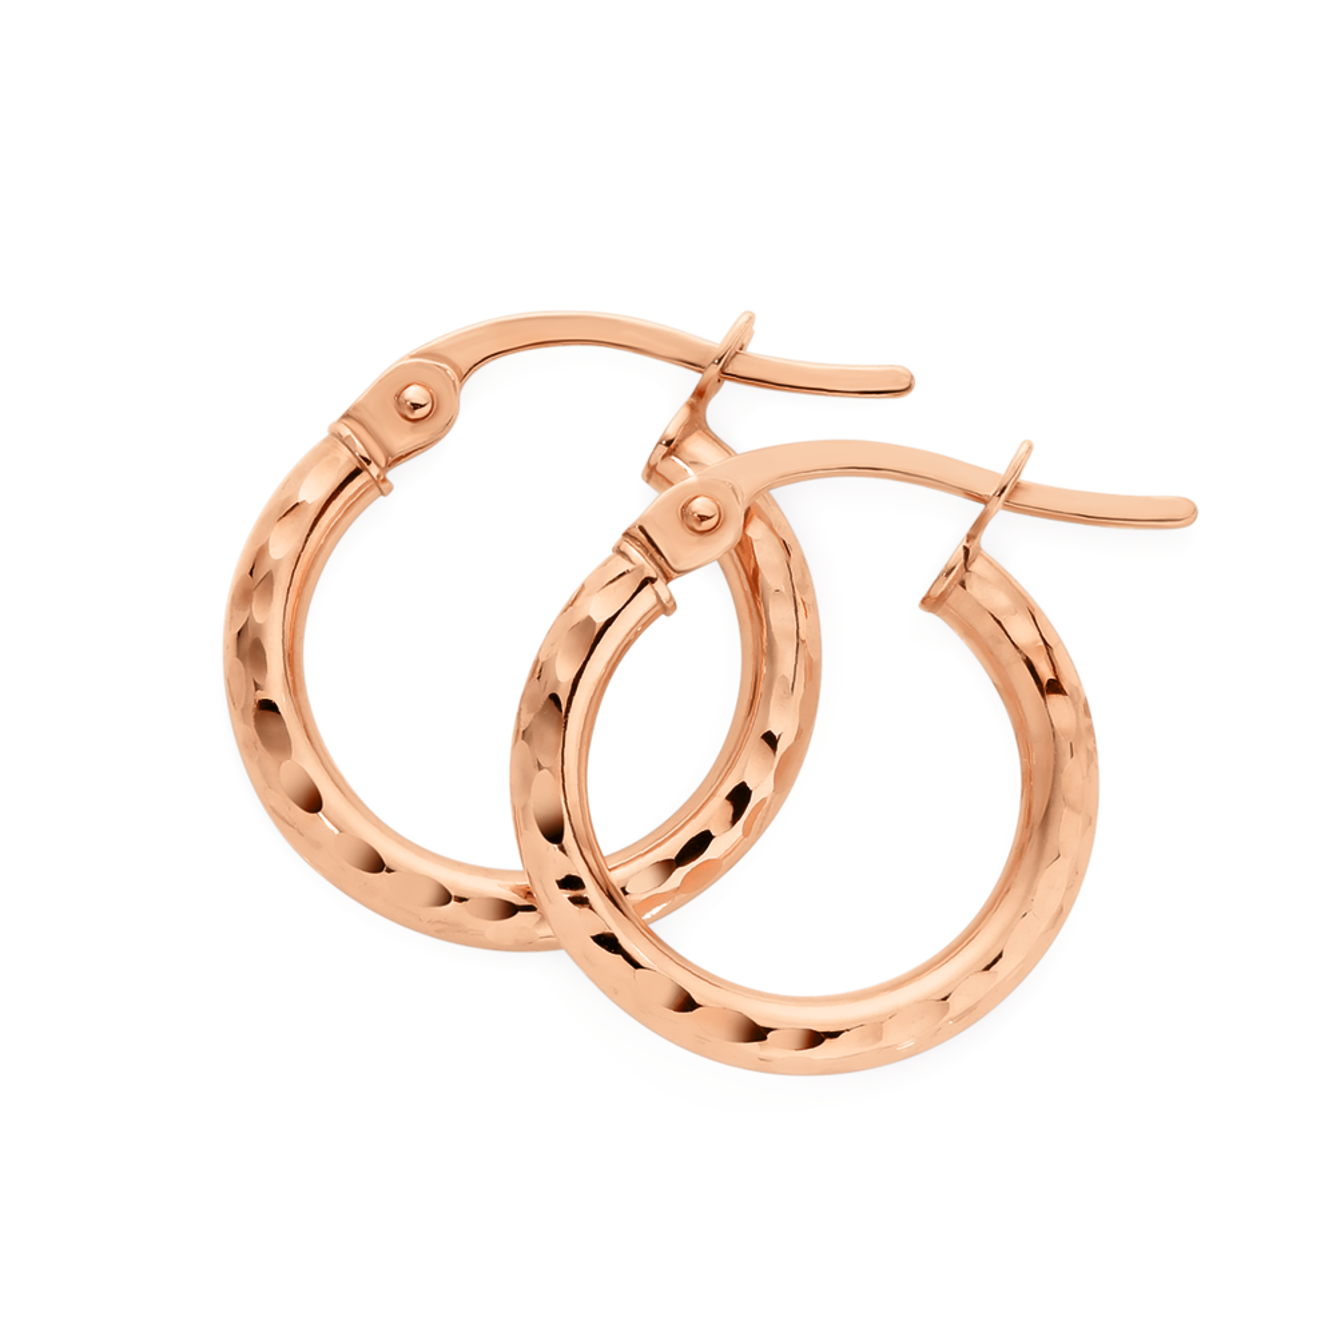 9ct Rose Gold Cubic Zirconia Stud Earrings | Earrings | Angus and Coote